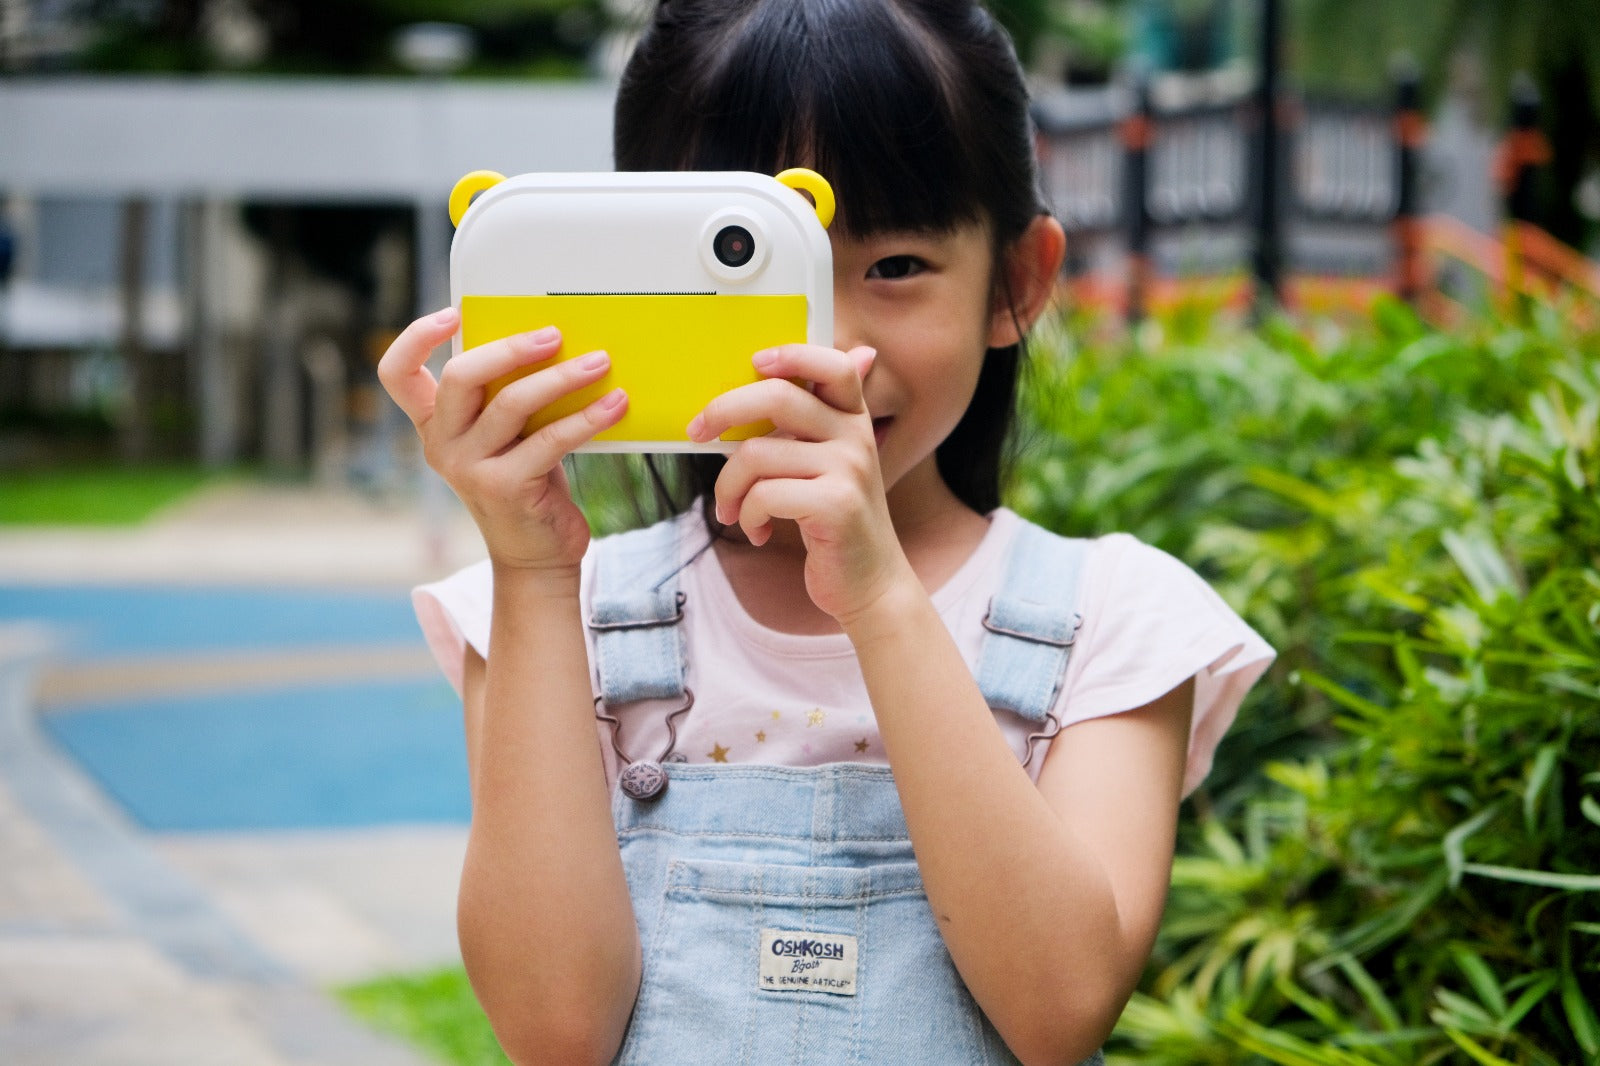 myFirst Camera Insta Wi - 5 Reasons You Should Buy Child's Camera To Improve Creative Abilities